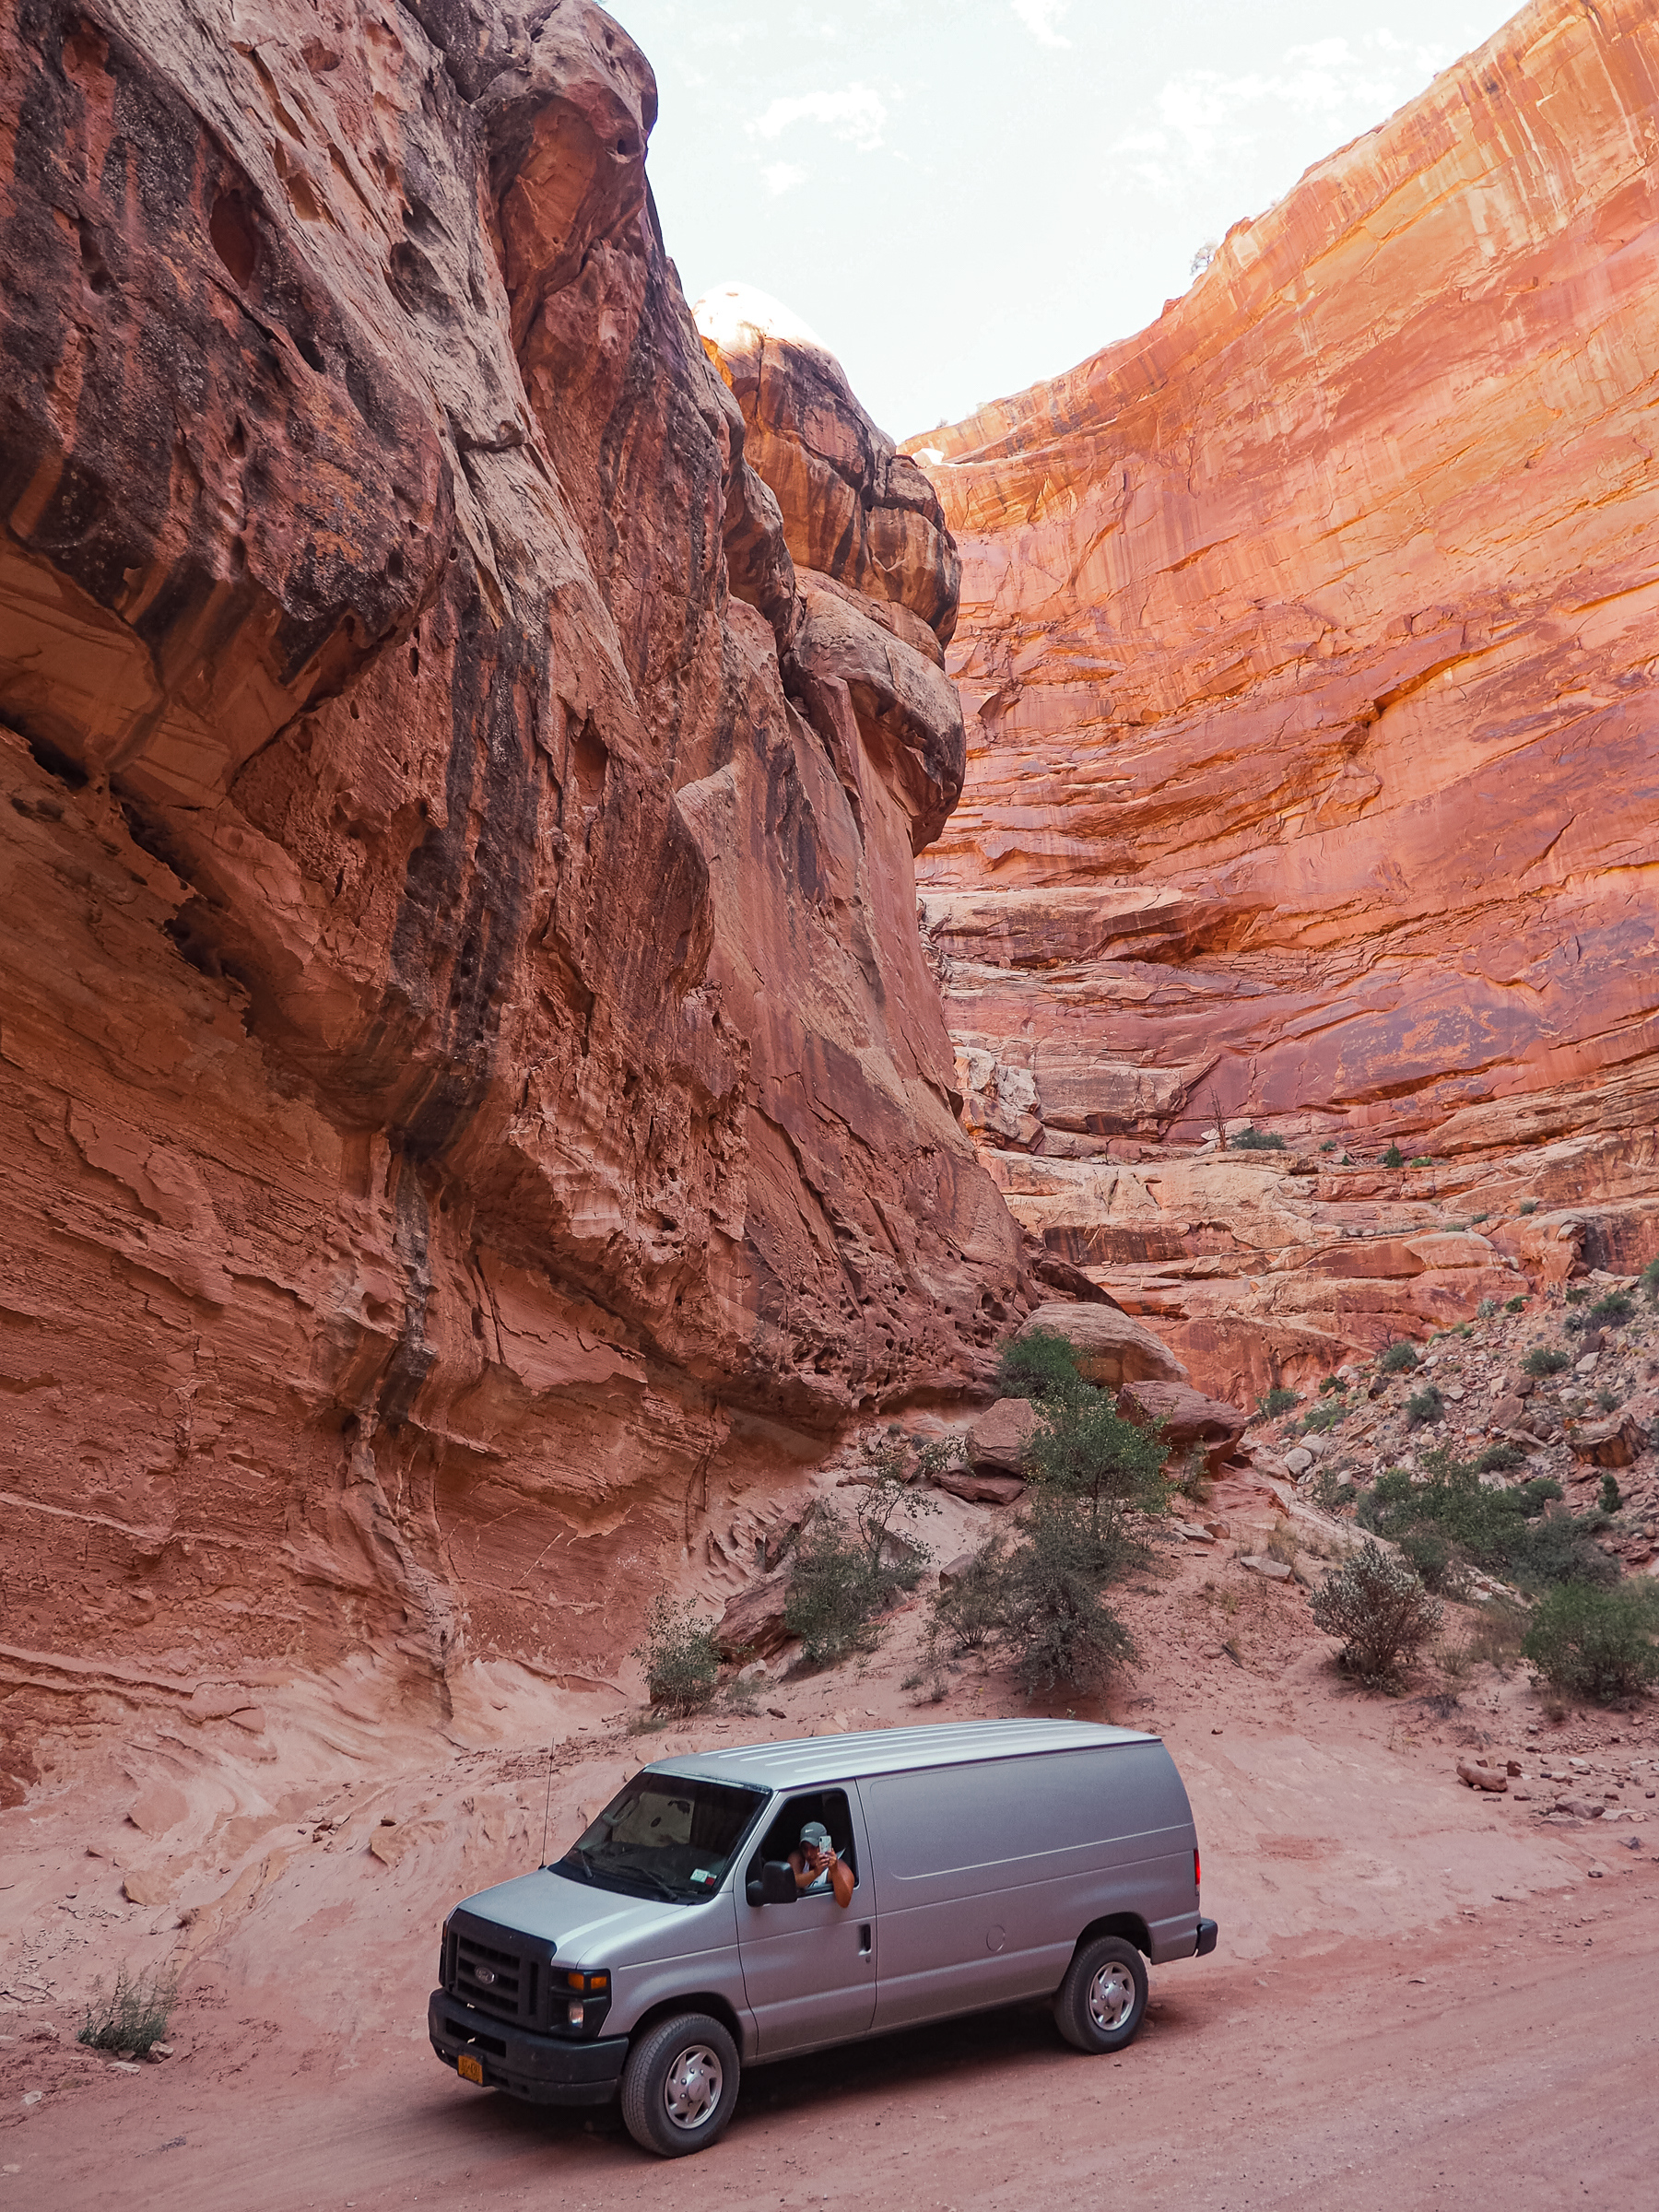 on the Grand Wash dirt road you will be surrounded by high canyon walls